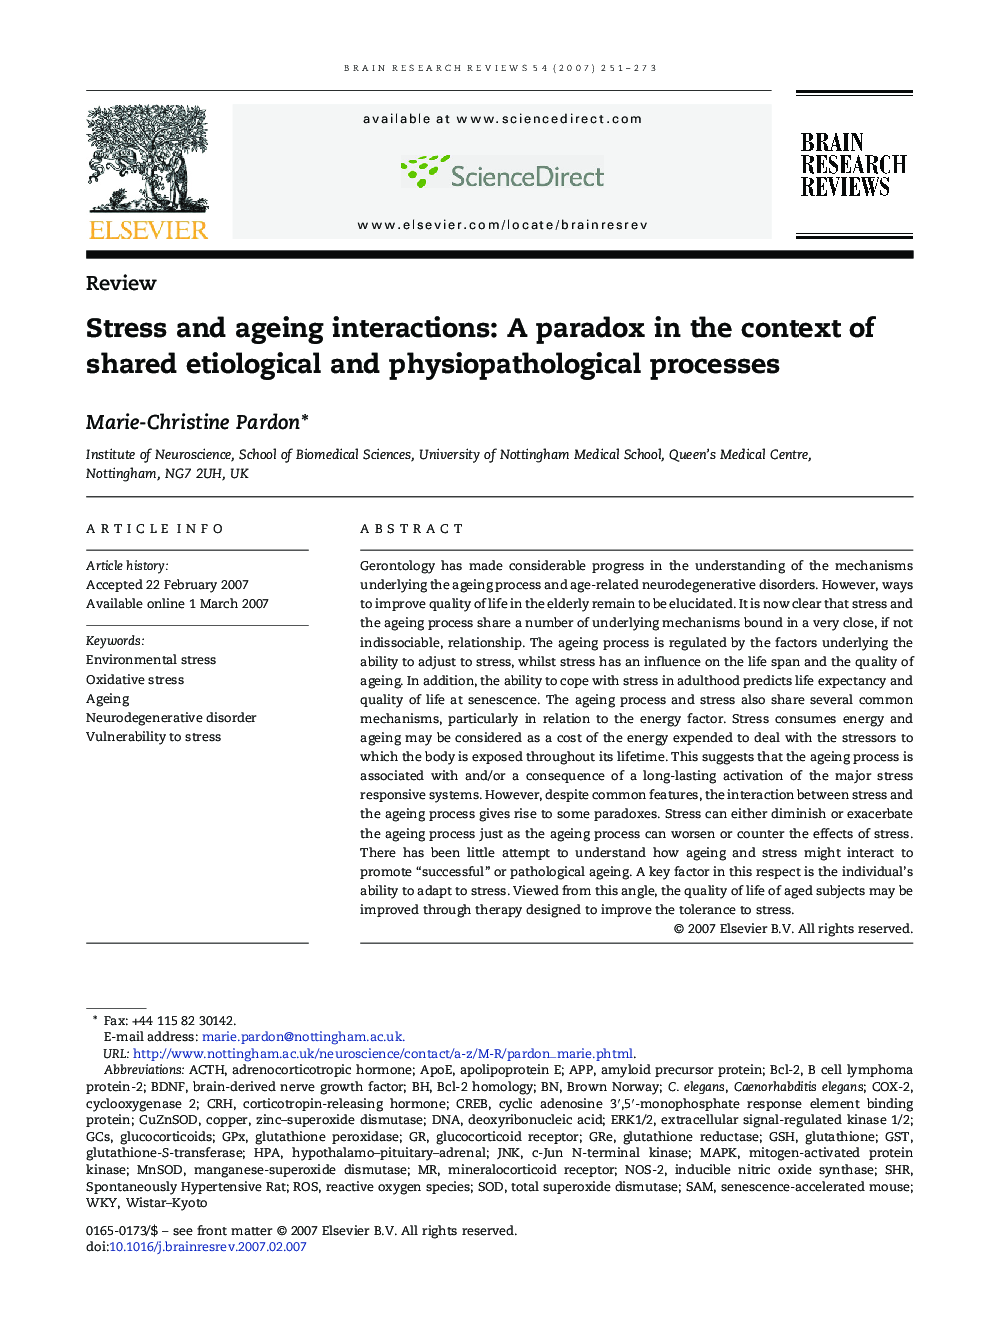 Stress and ageing interactions: A paradox in the context of shared etiological and physiopathological processes